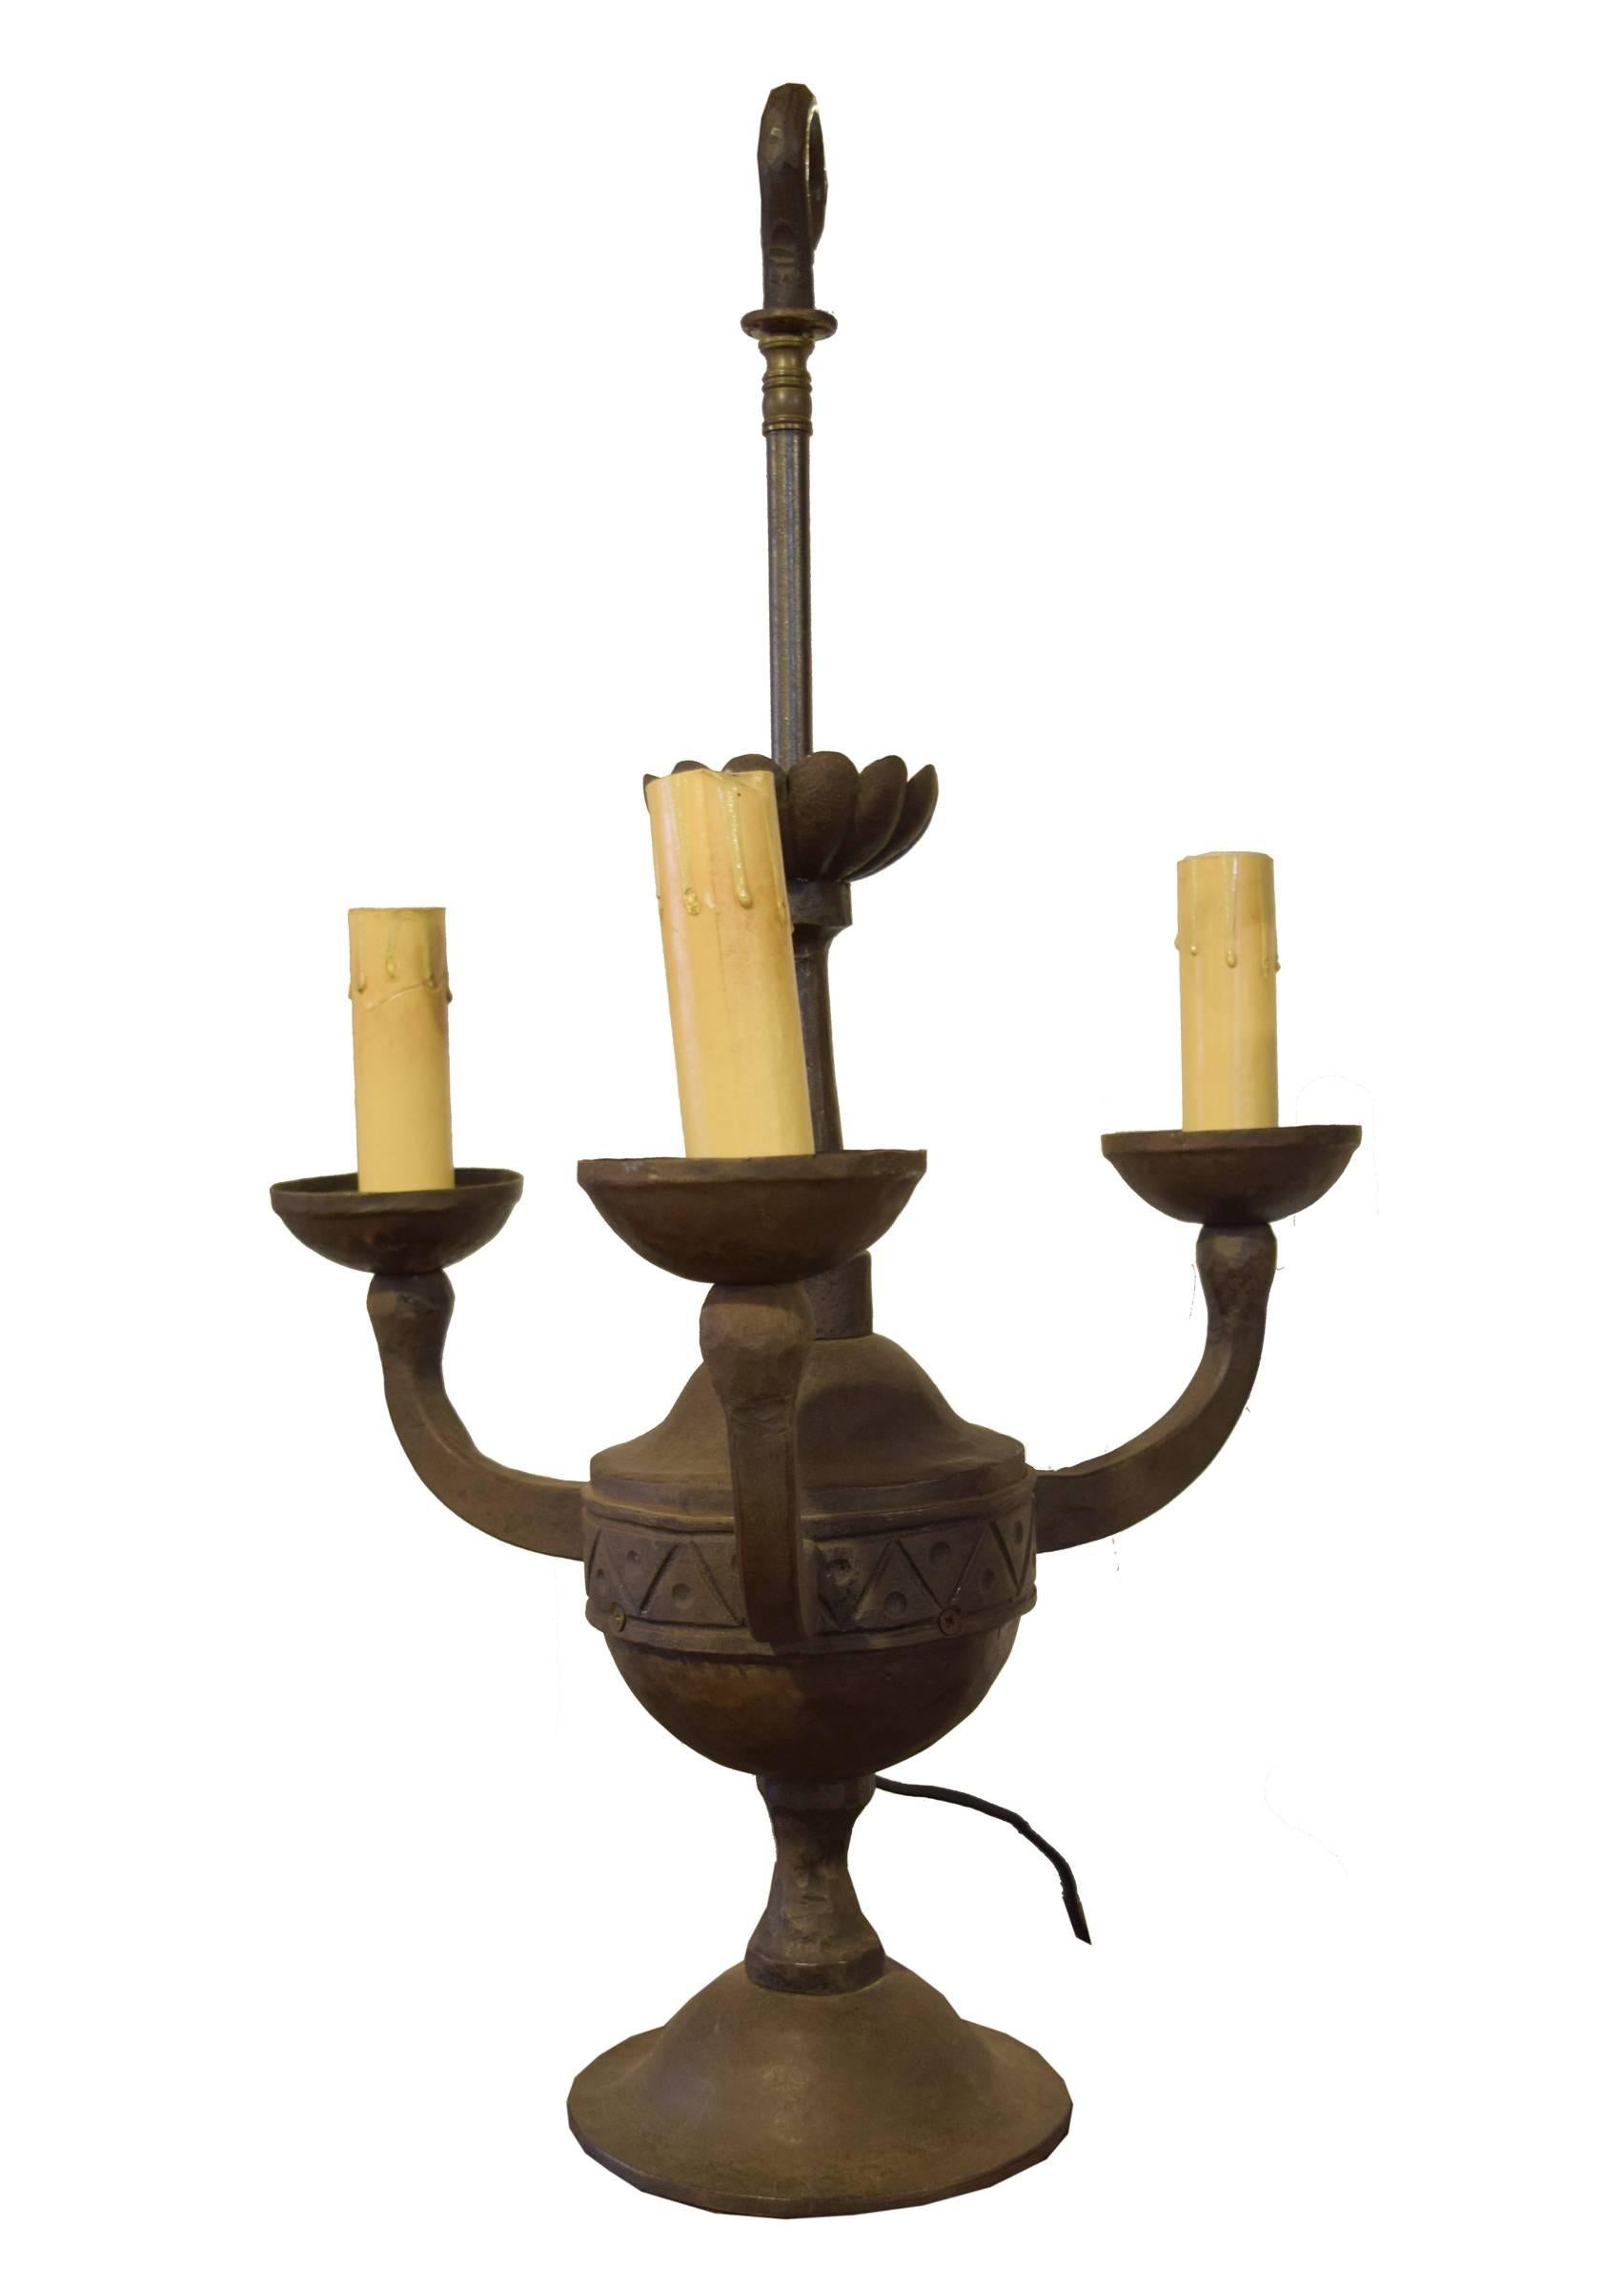 Argentine wrought iron three-arm fixture by famed blacksmith, Jose Thenee. With its shepherd’s crook top and flat bottom, this light fixture can be hung or used as a table lamp. Thenee is considered one of the world's greatest blacksmiths and won